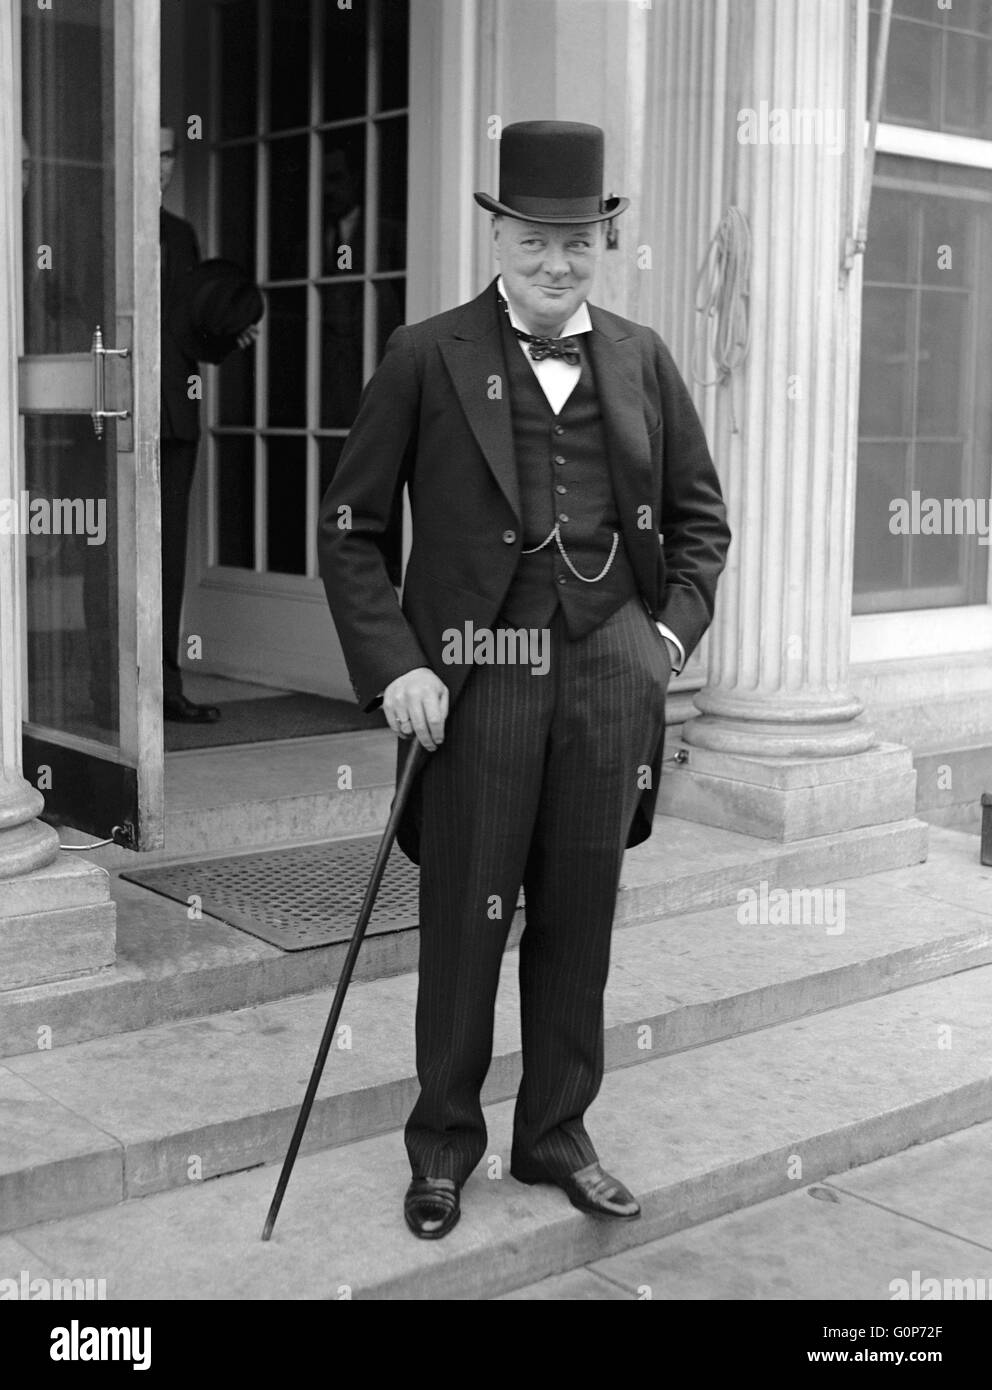 British statesman Winston Churchill departs the White House after meeting with U.S President Herbert Hoover October 19, 1929 in Washington, DC. Stock Photo